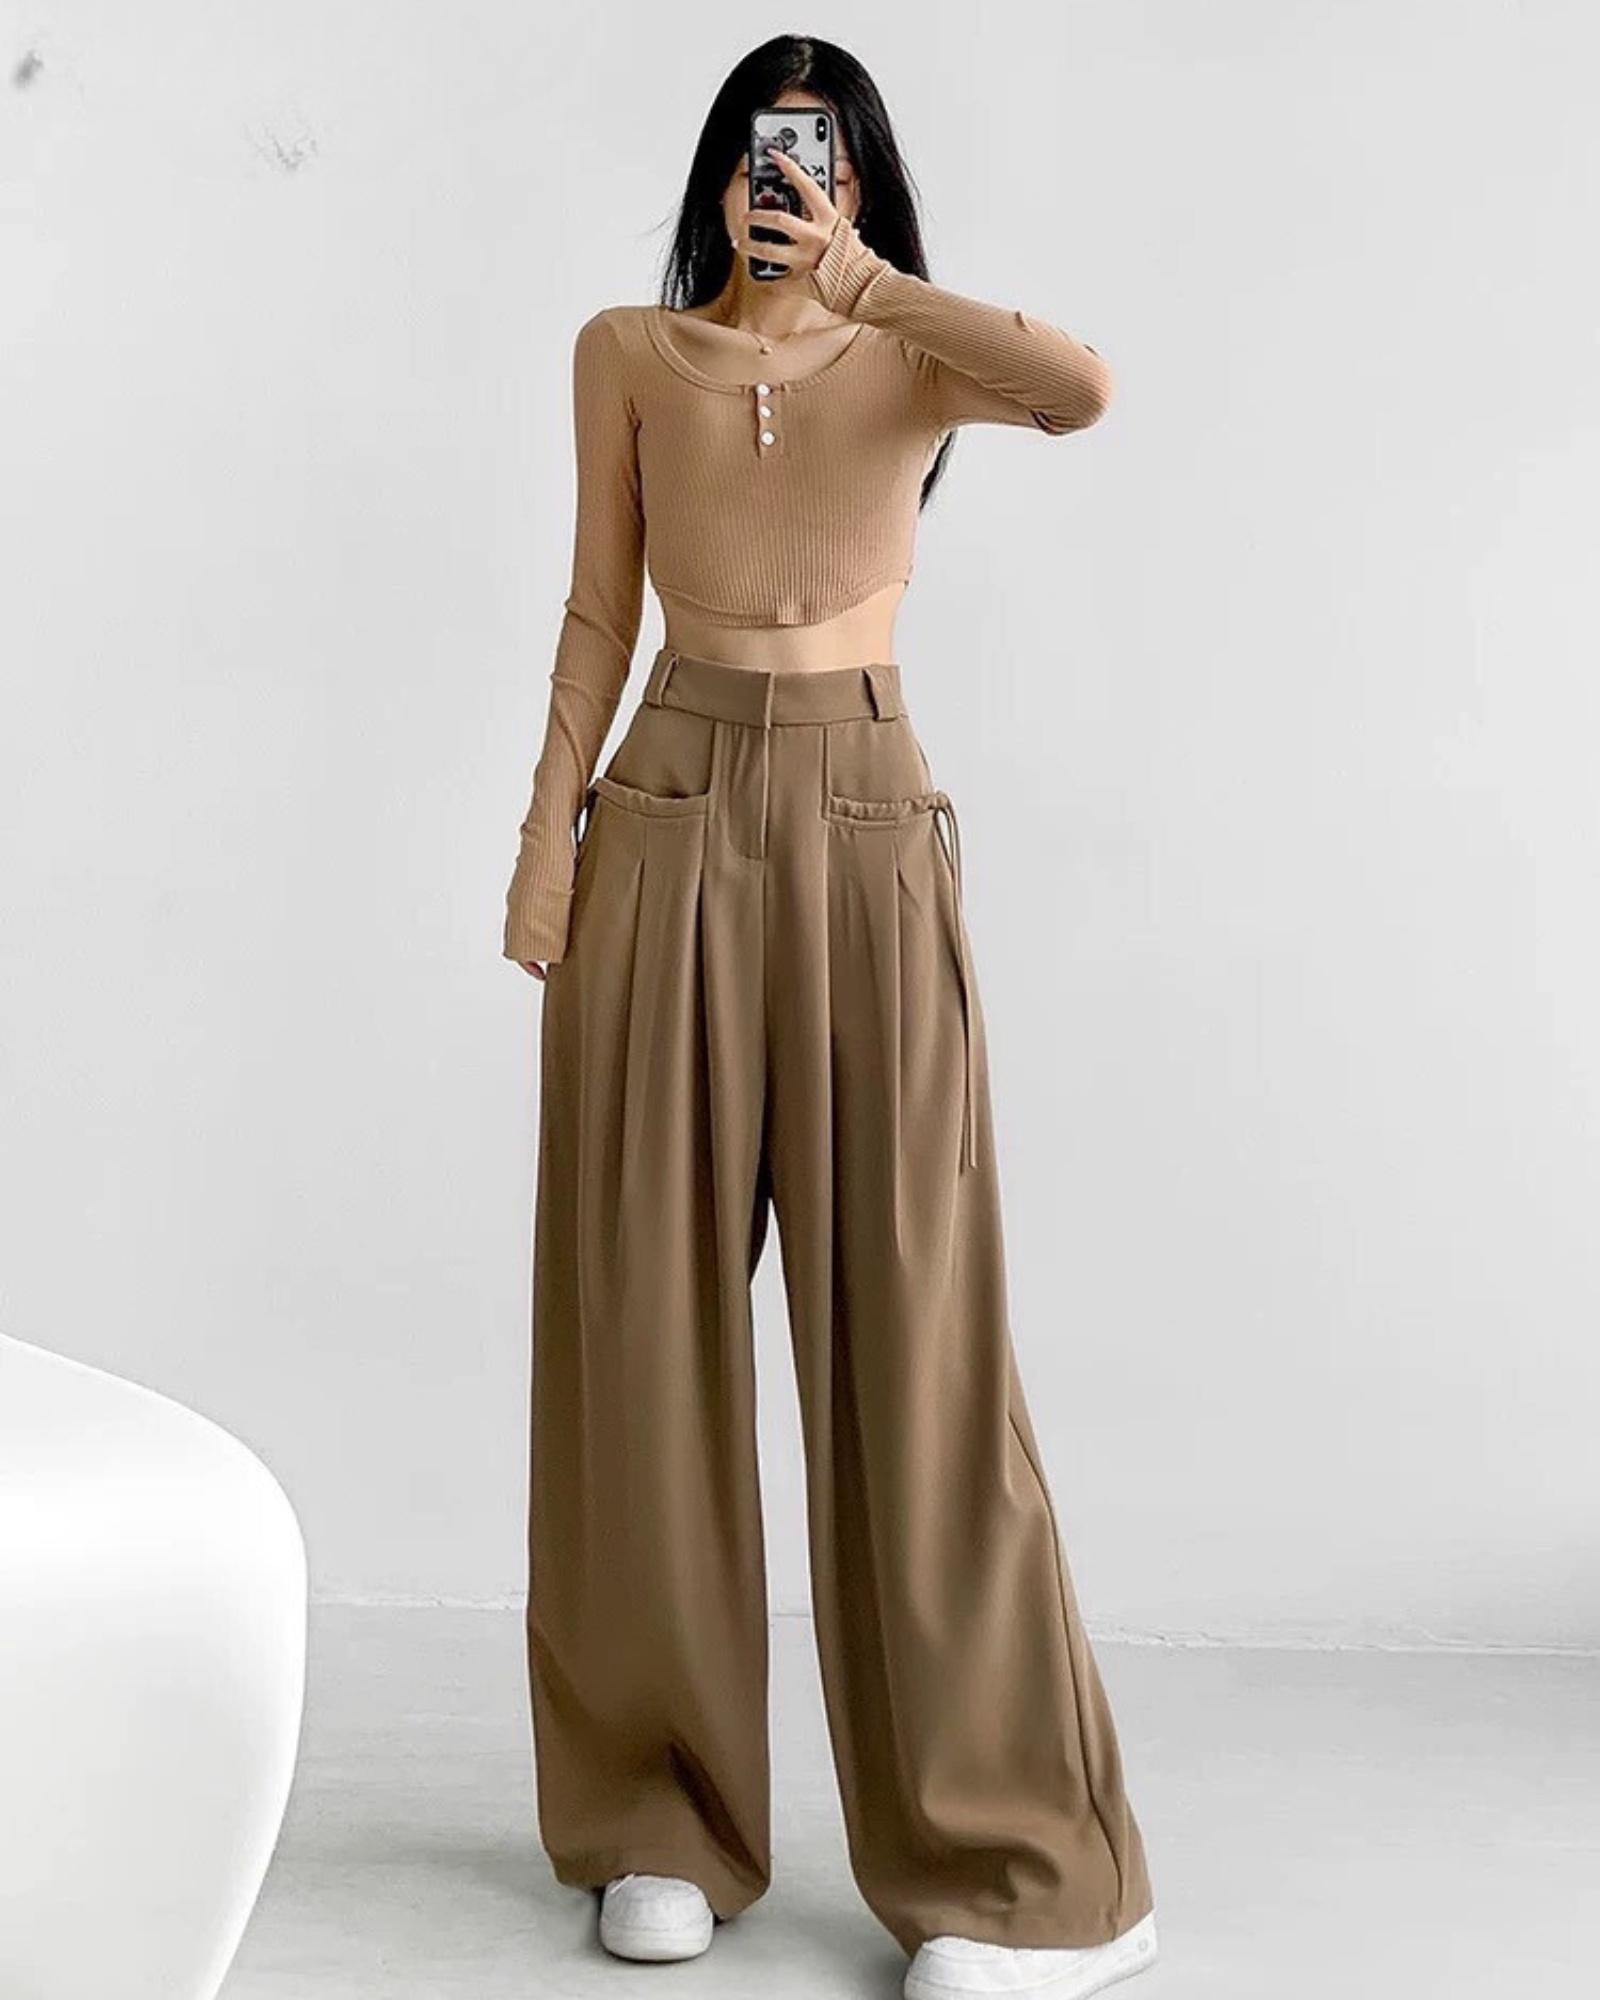 Our top seller is back‼️ @offduty.india 🔍String Fling Korean Pants.  Available in Black, Charcoal, Nude & Coco brown. . #koreanpan